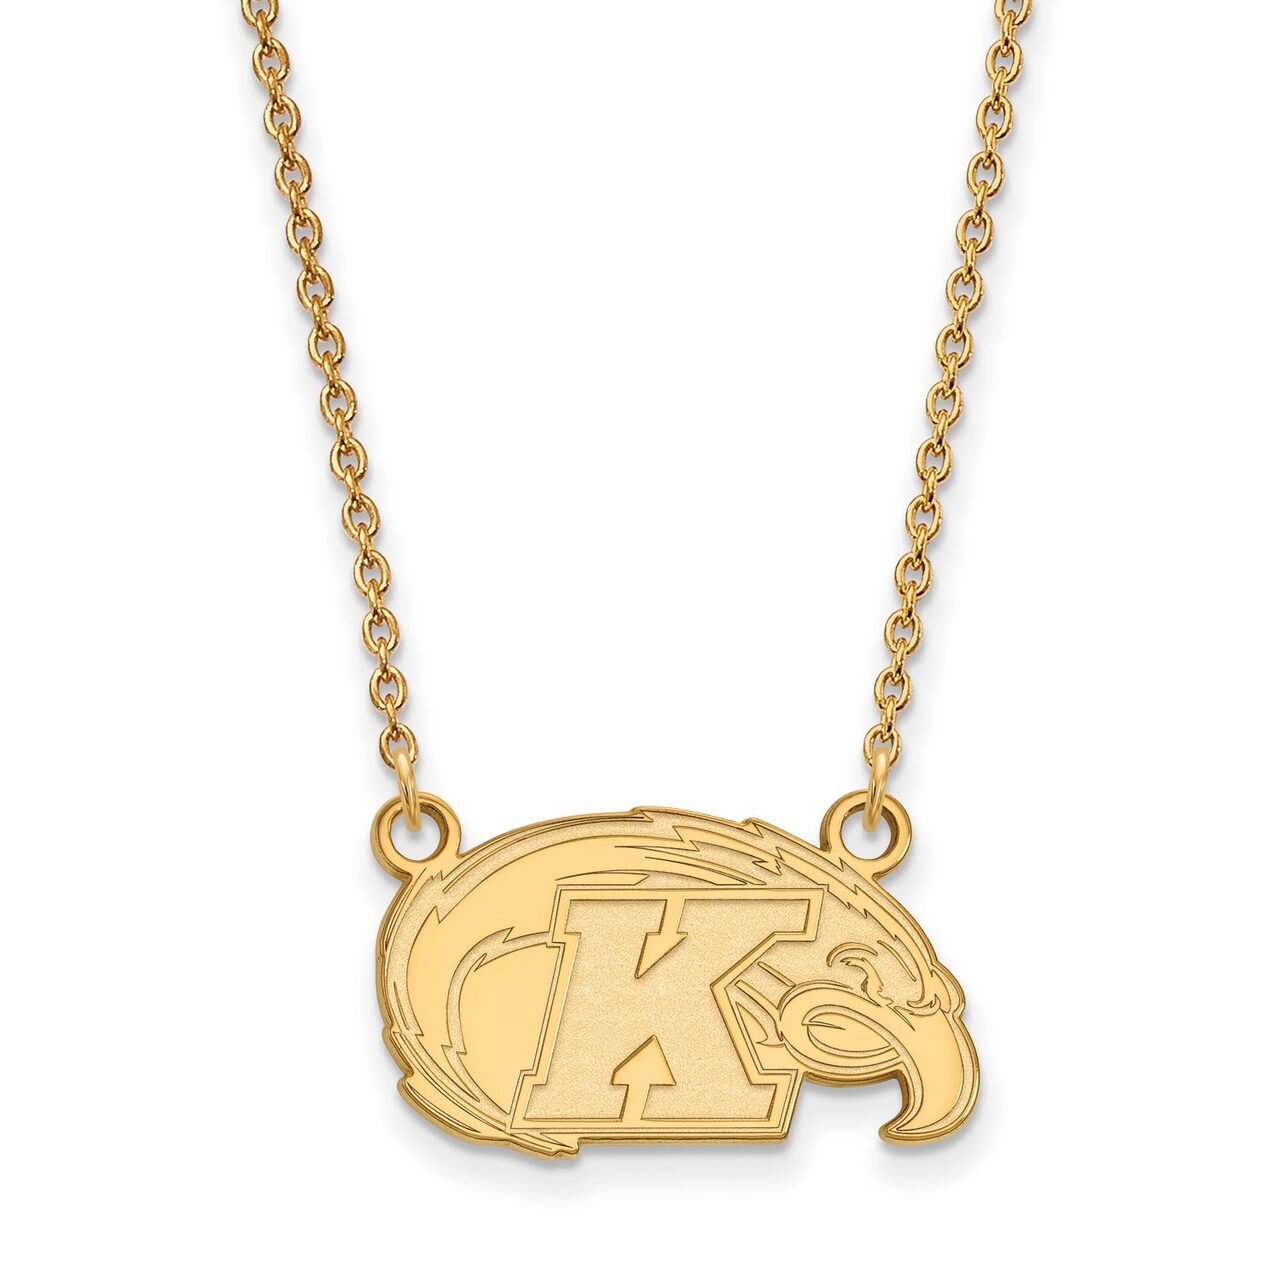 Kent State University Small Pendant with Chain Necklace 10k Yellow Gold 1Y008KEN-18